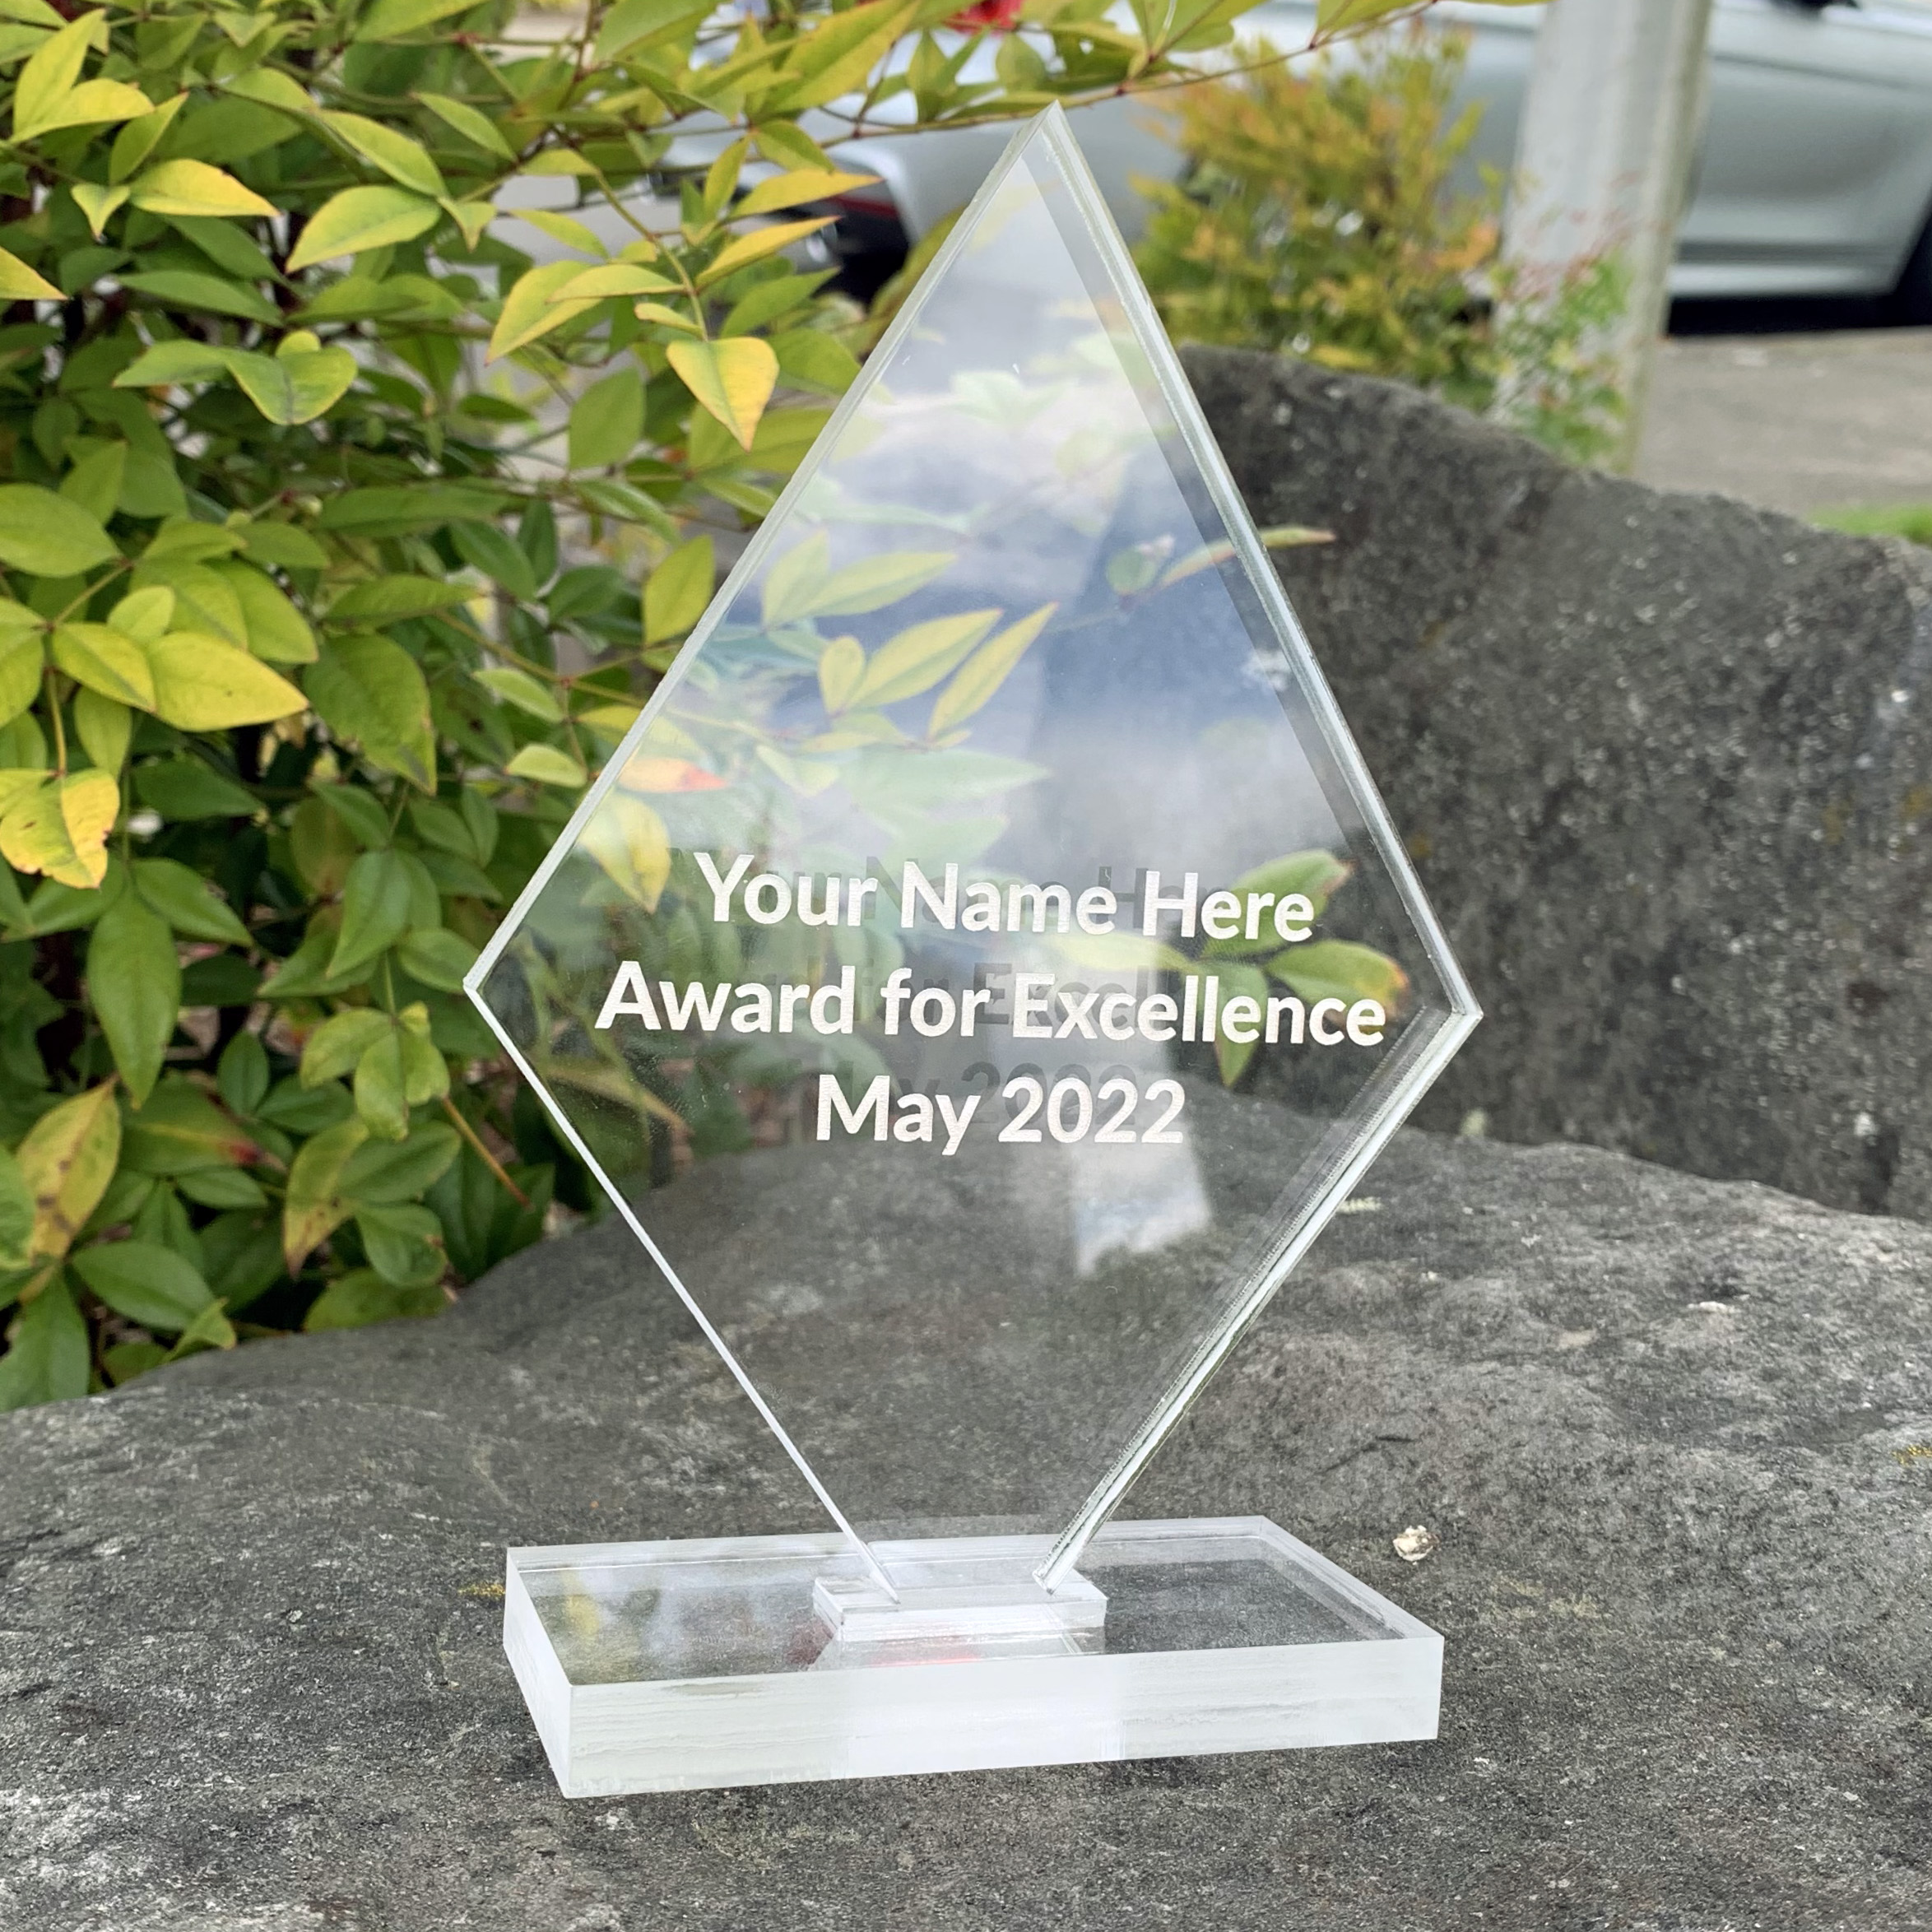 Laser Engraving: a diamond-shaped award made from clear acrylic with text engraved.